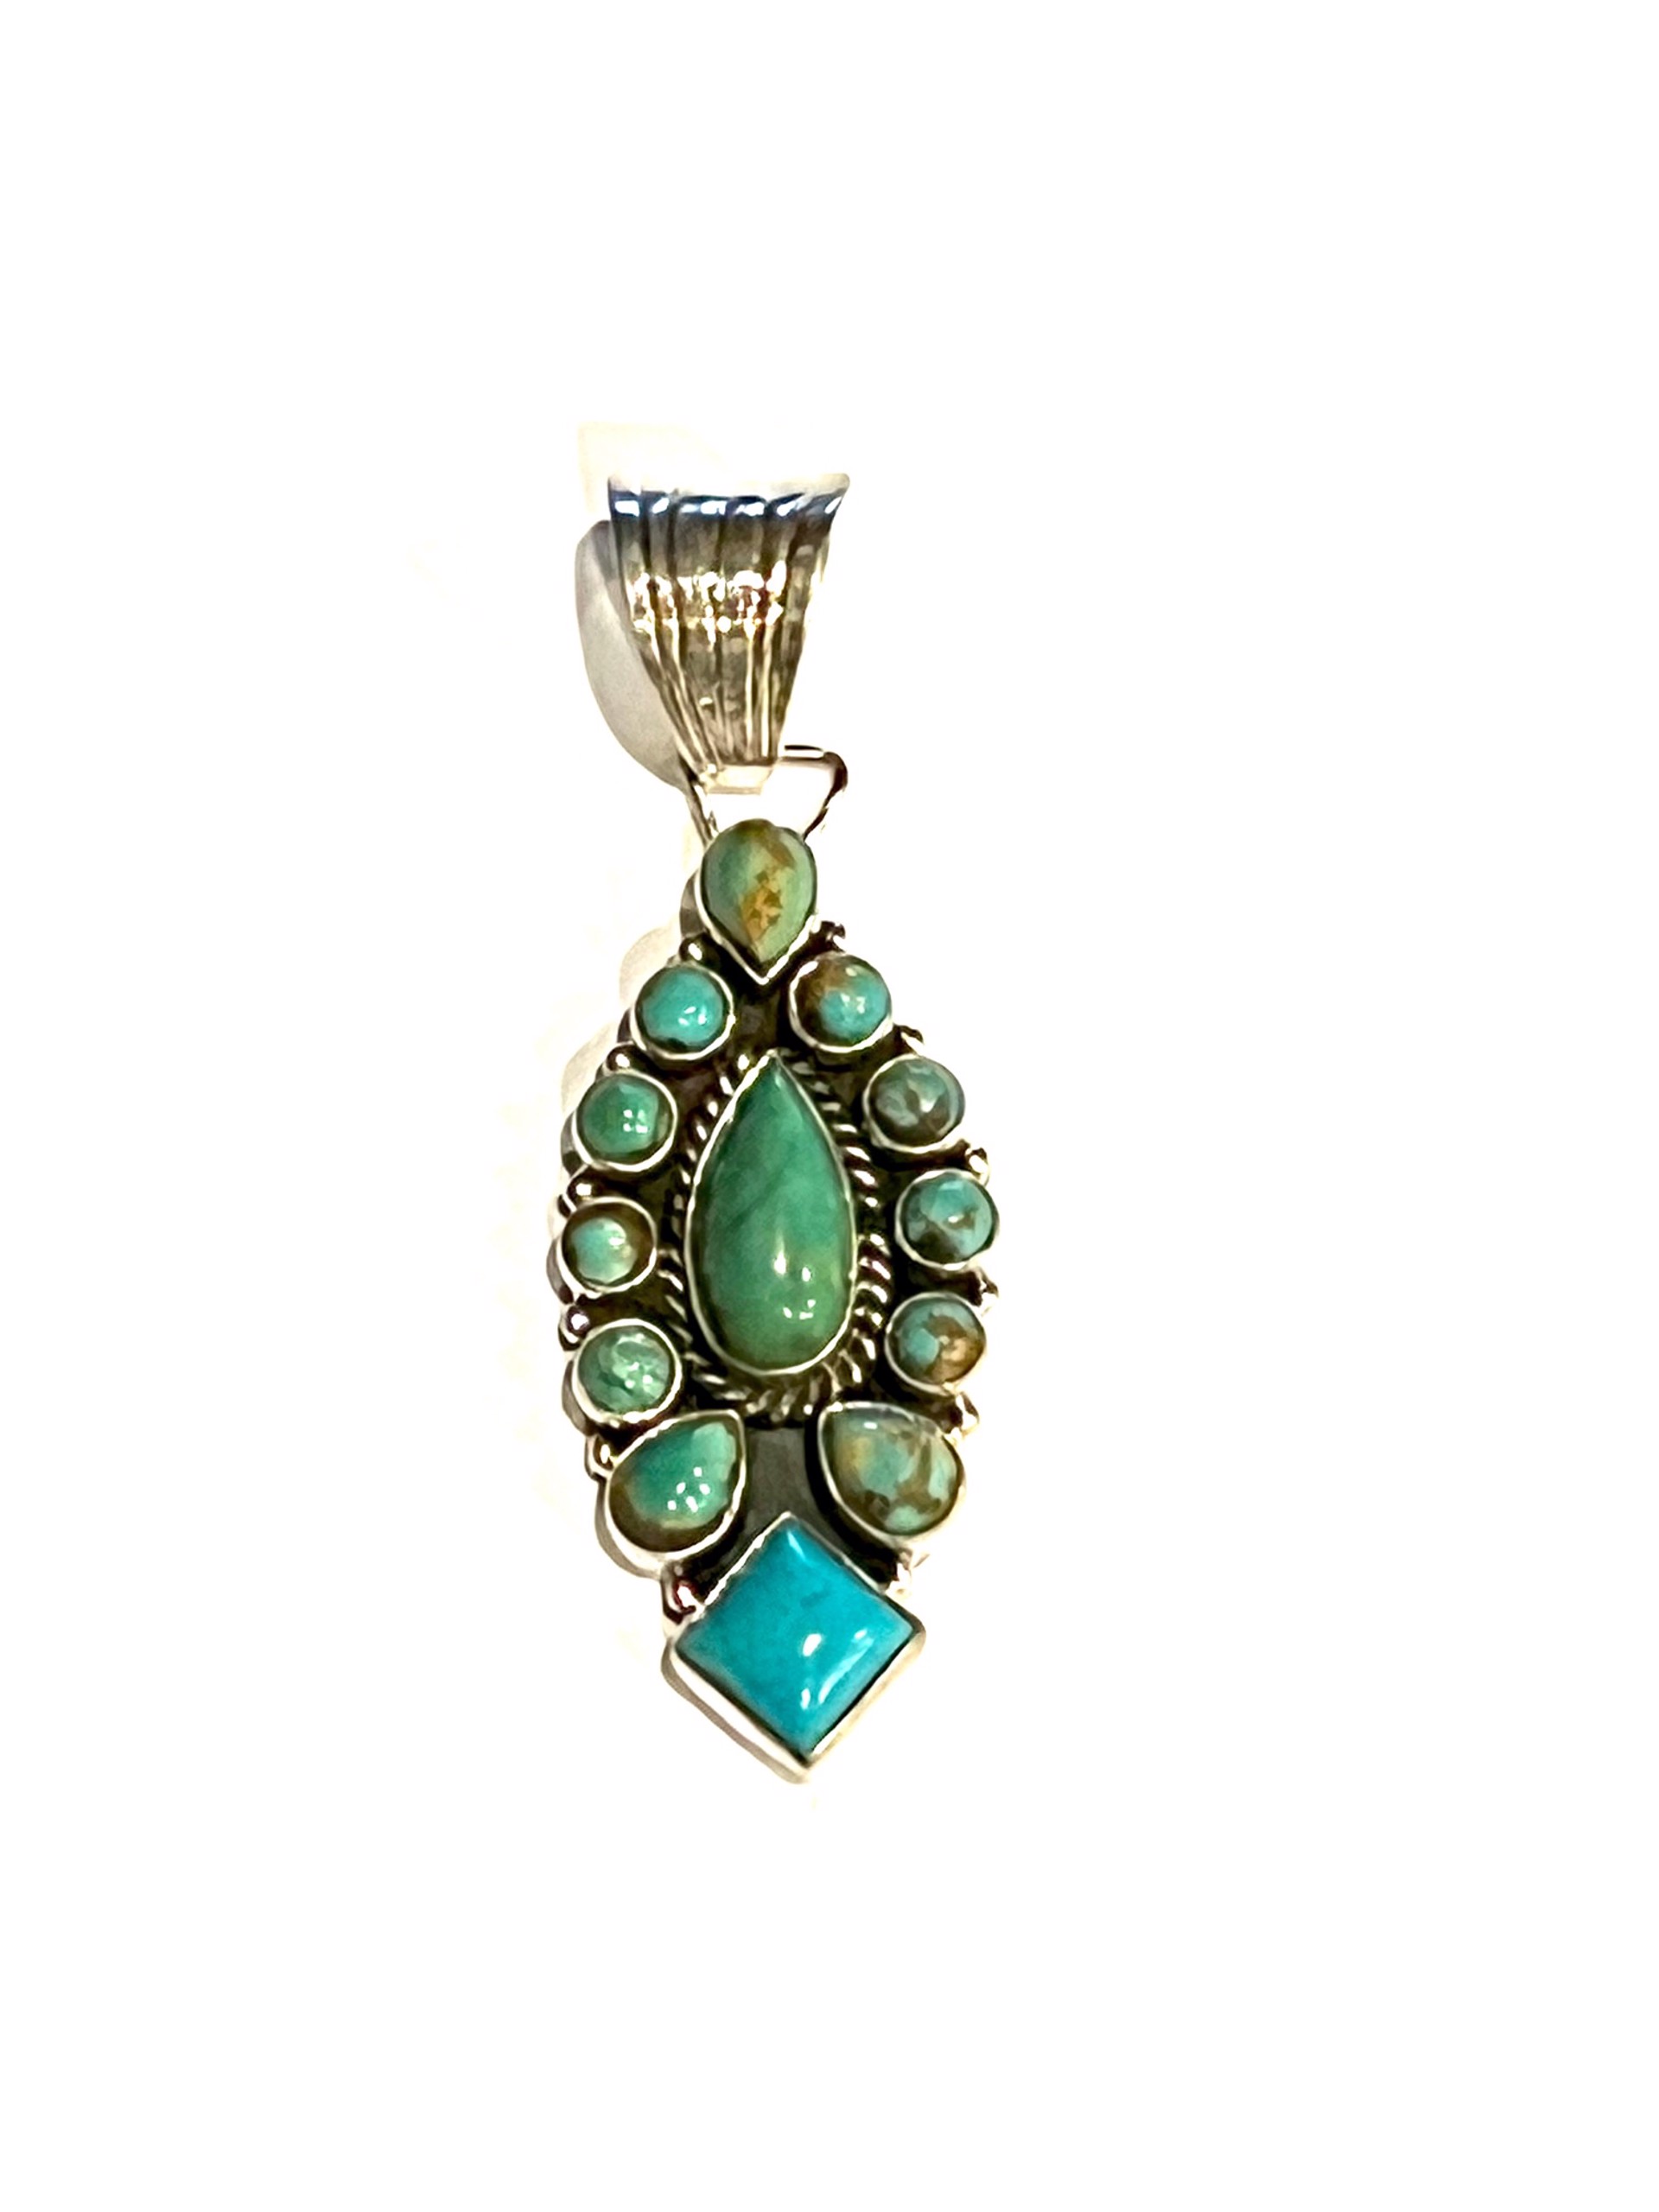 Pendant - Turquoise Marquis in Sterling Silver by Dan Dodson